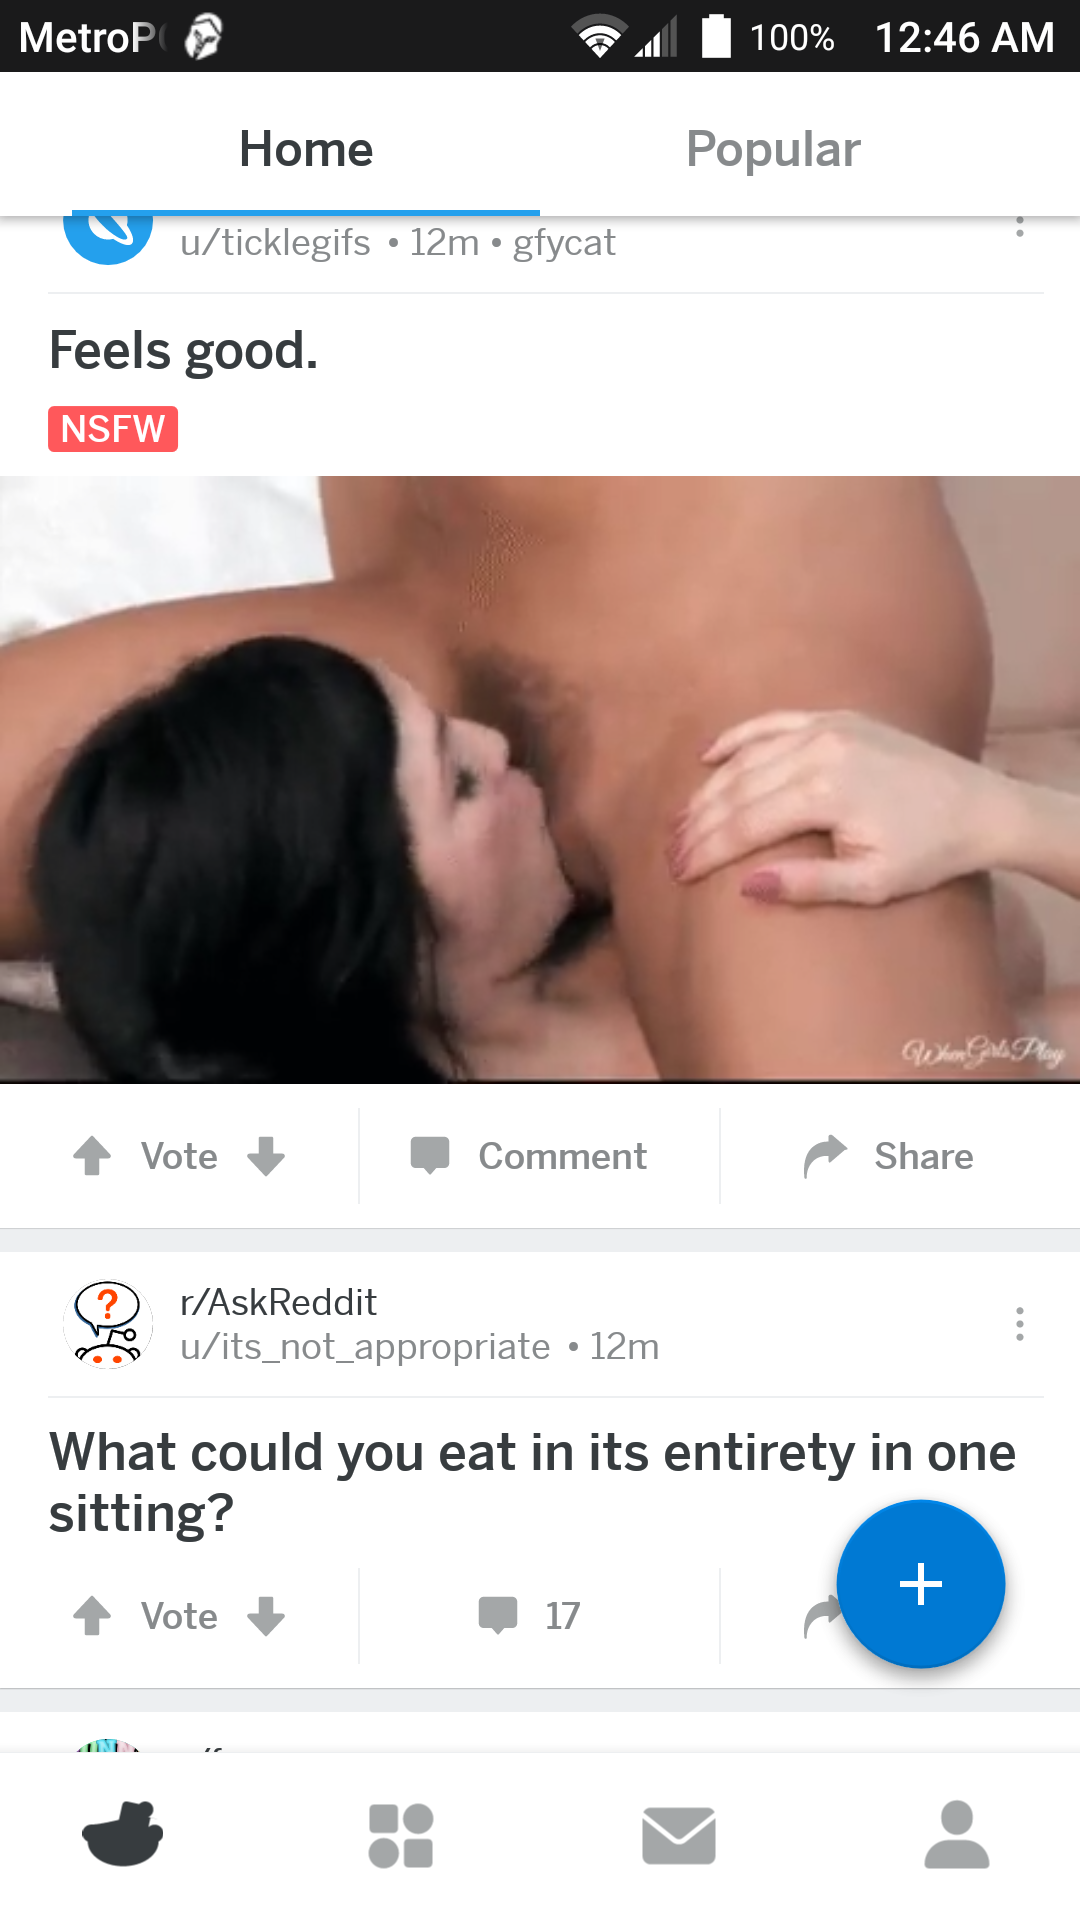 Do You Think Reddit Does This On Purpose Sometimes?